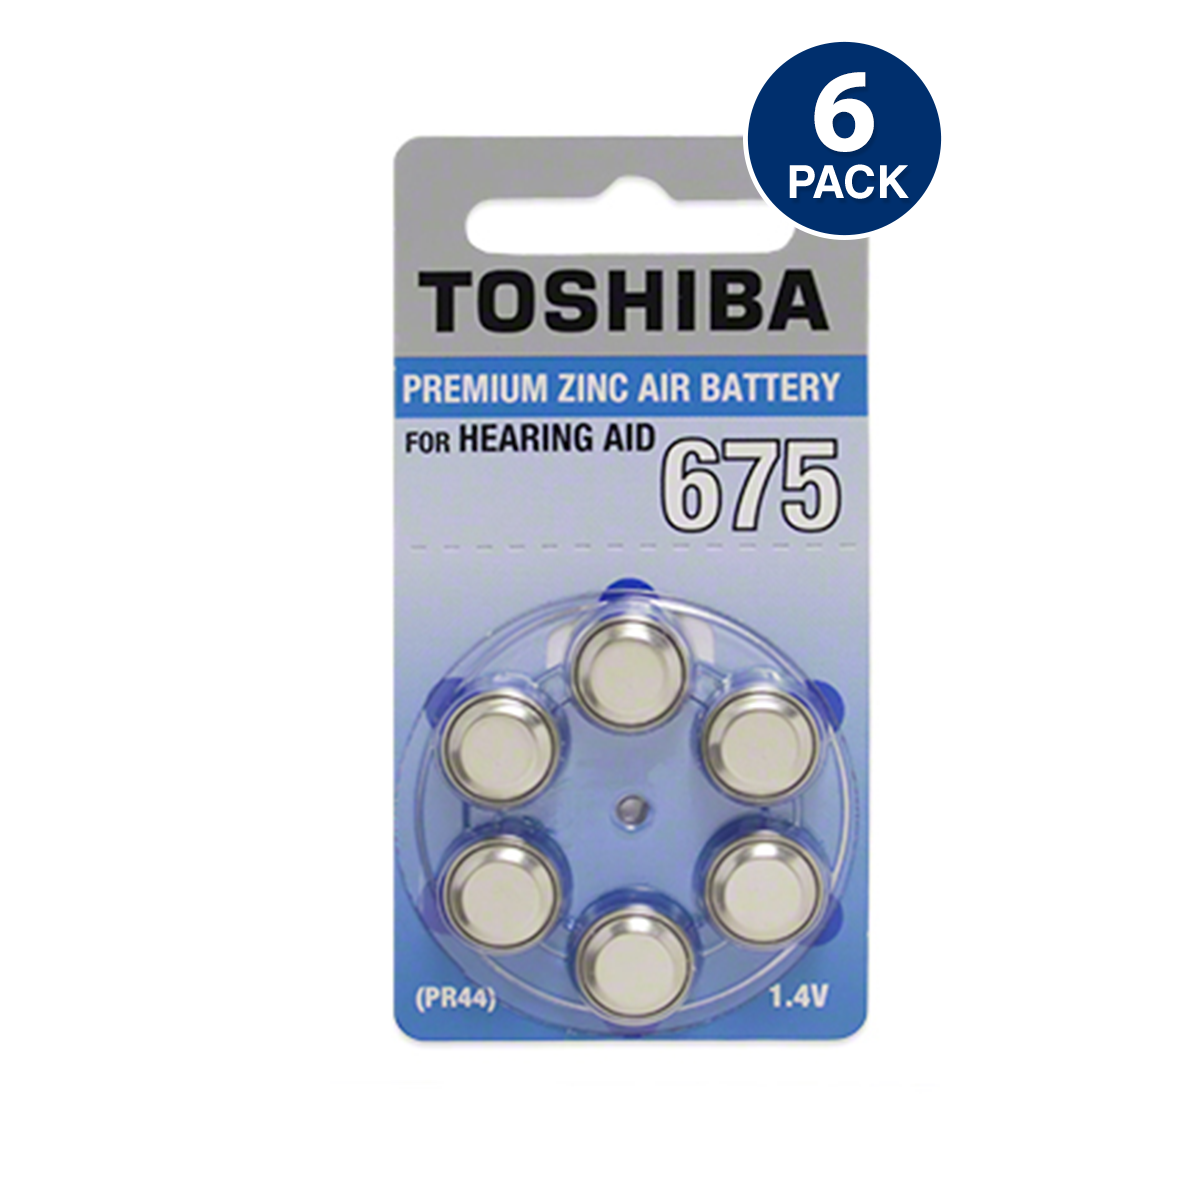 Toshiba Size 675 Hearing Aid Batteries (6 PC)